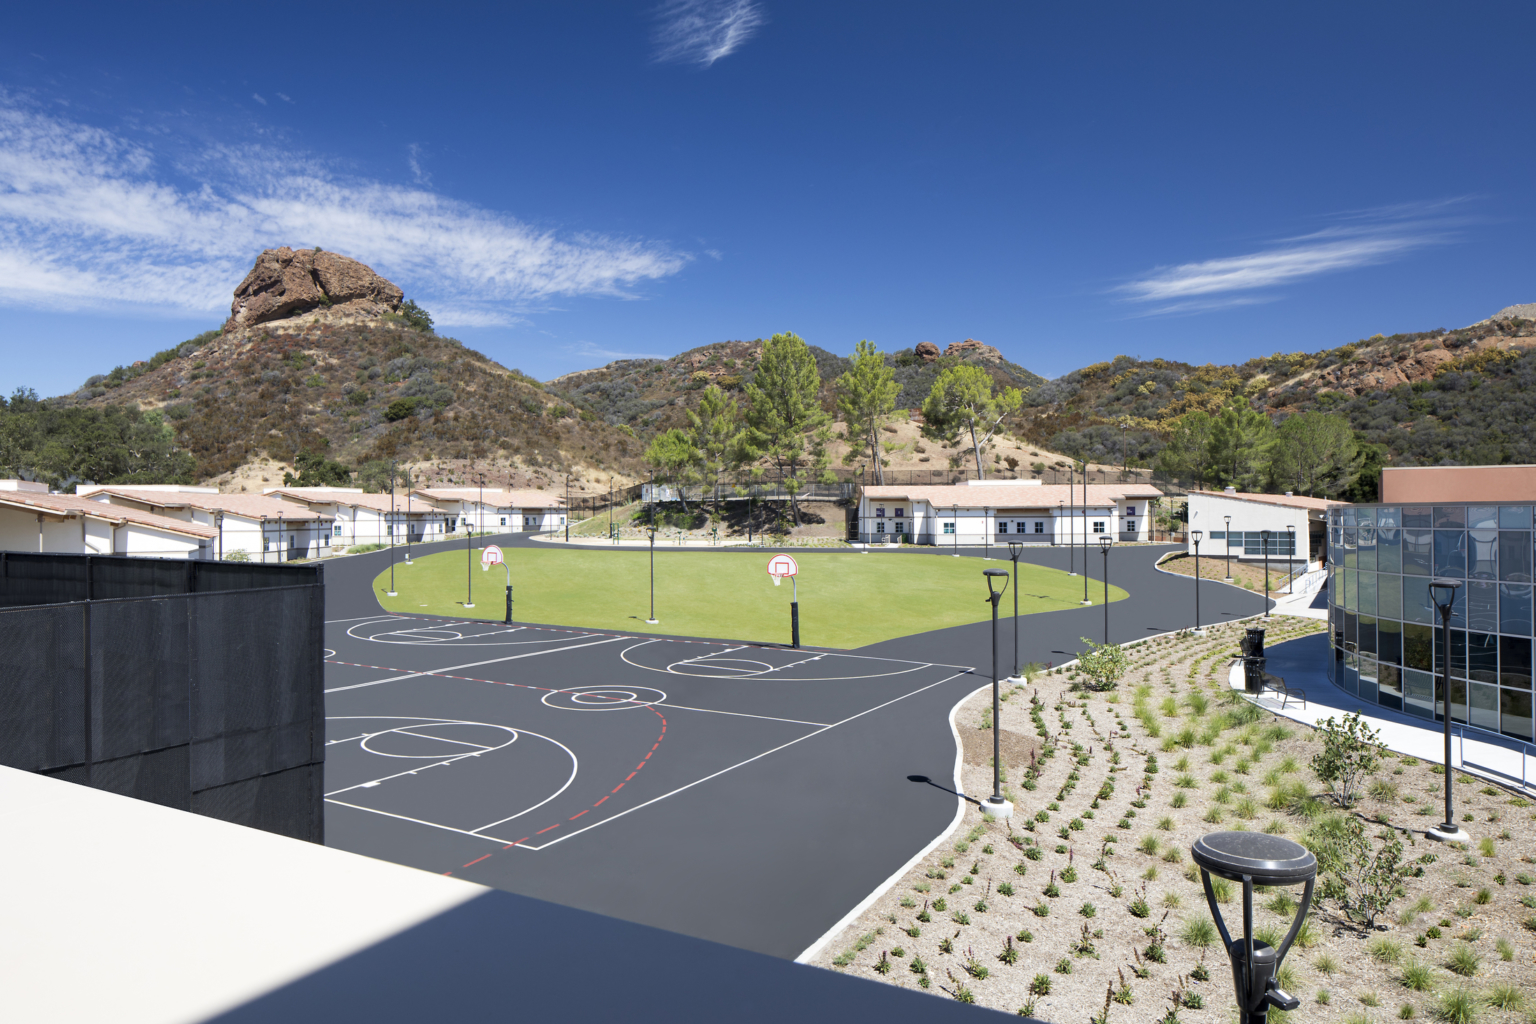 LA County Campus Kilpatrick with basketball court and green grass